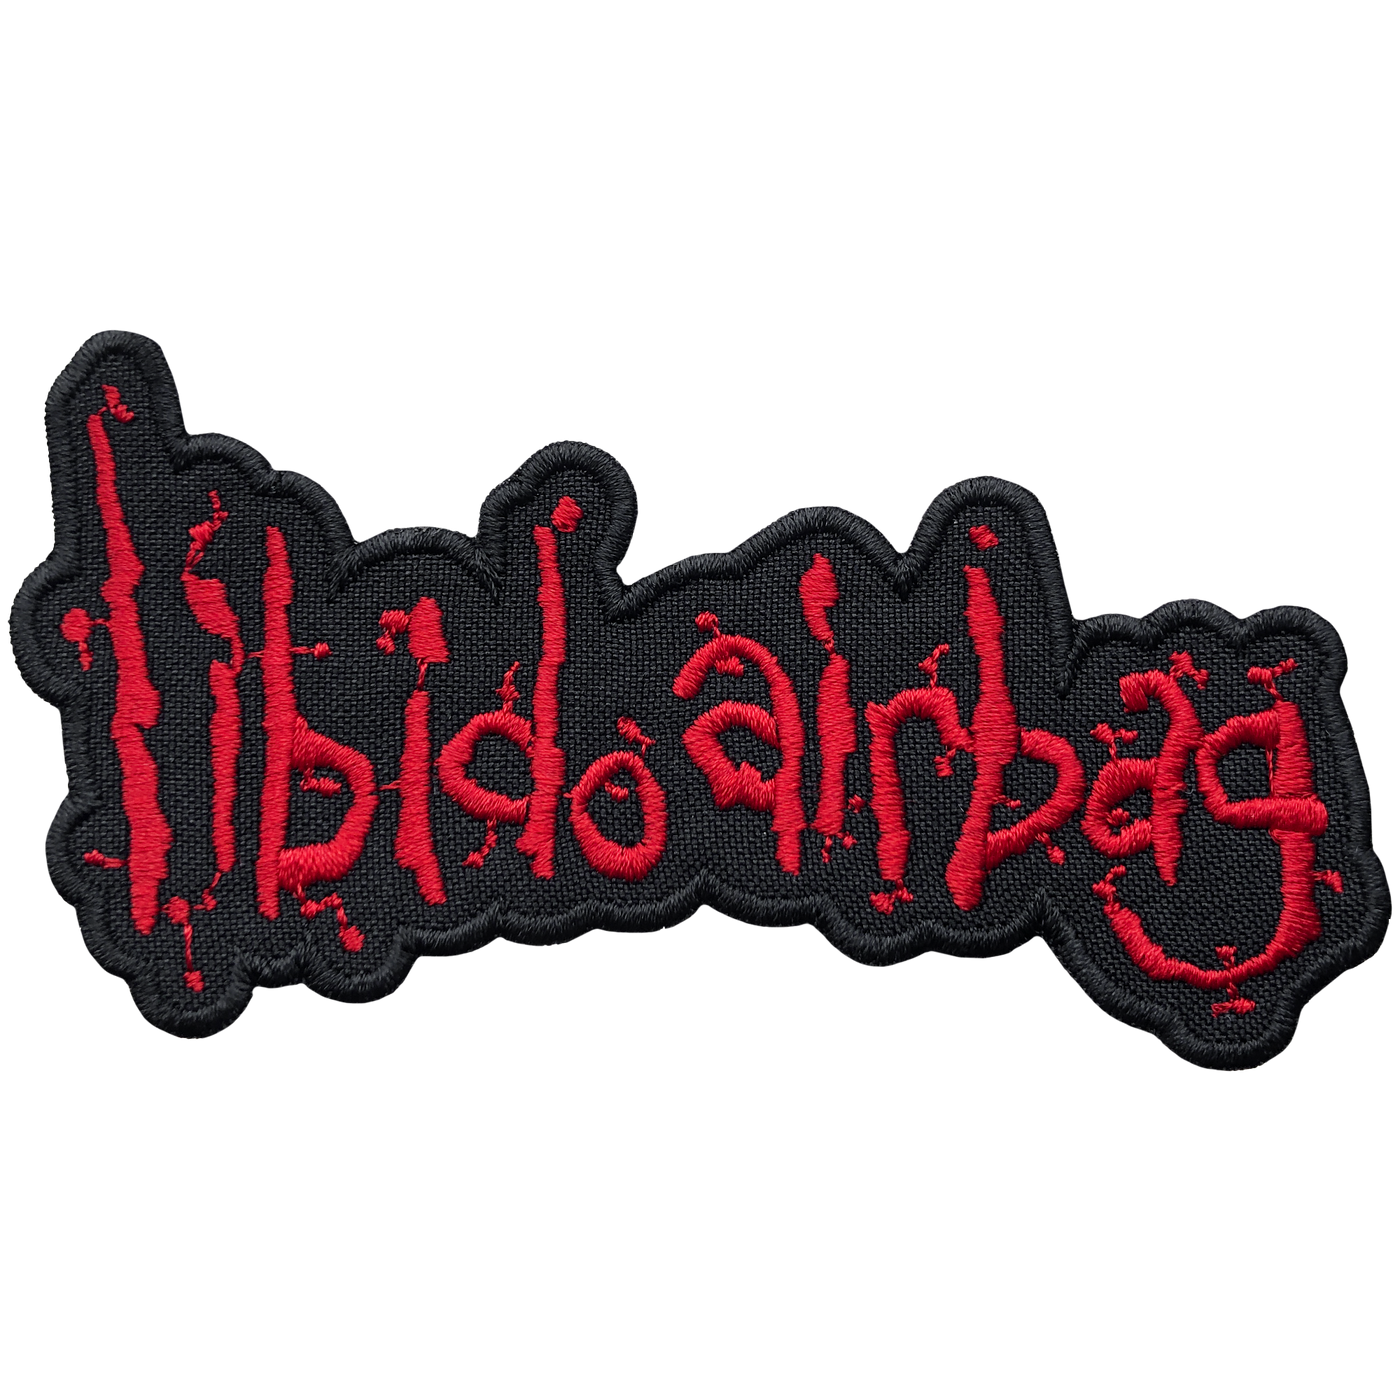 Libido Airbag Patches